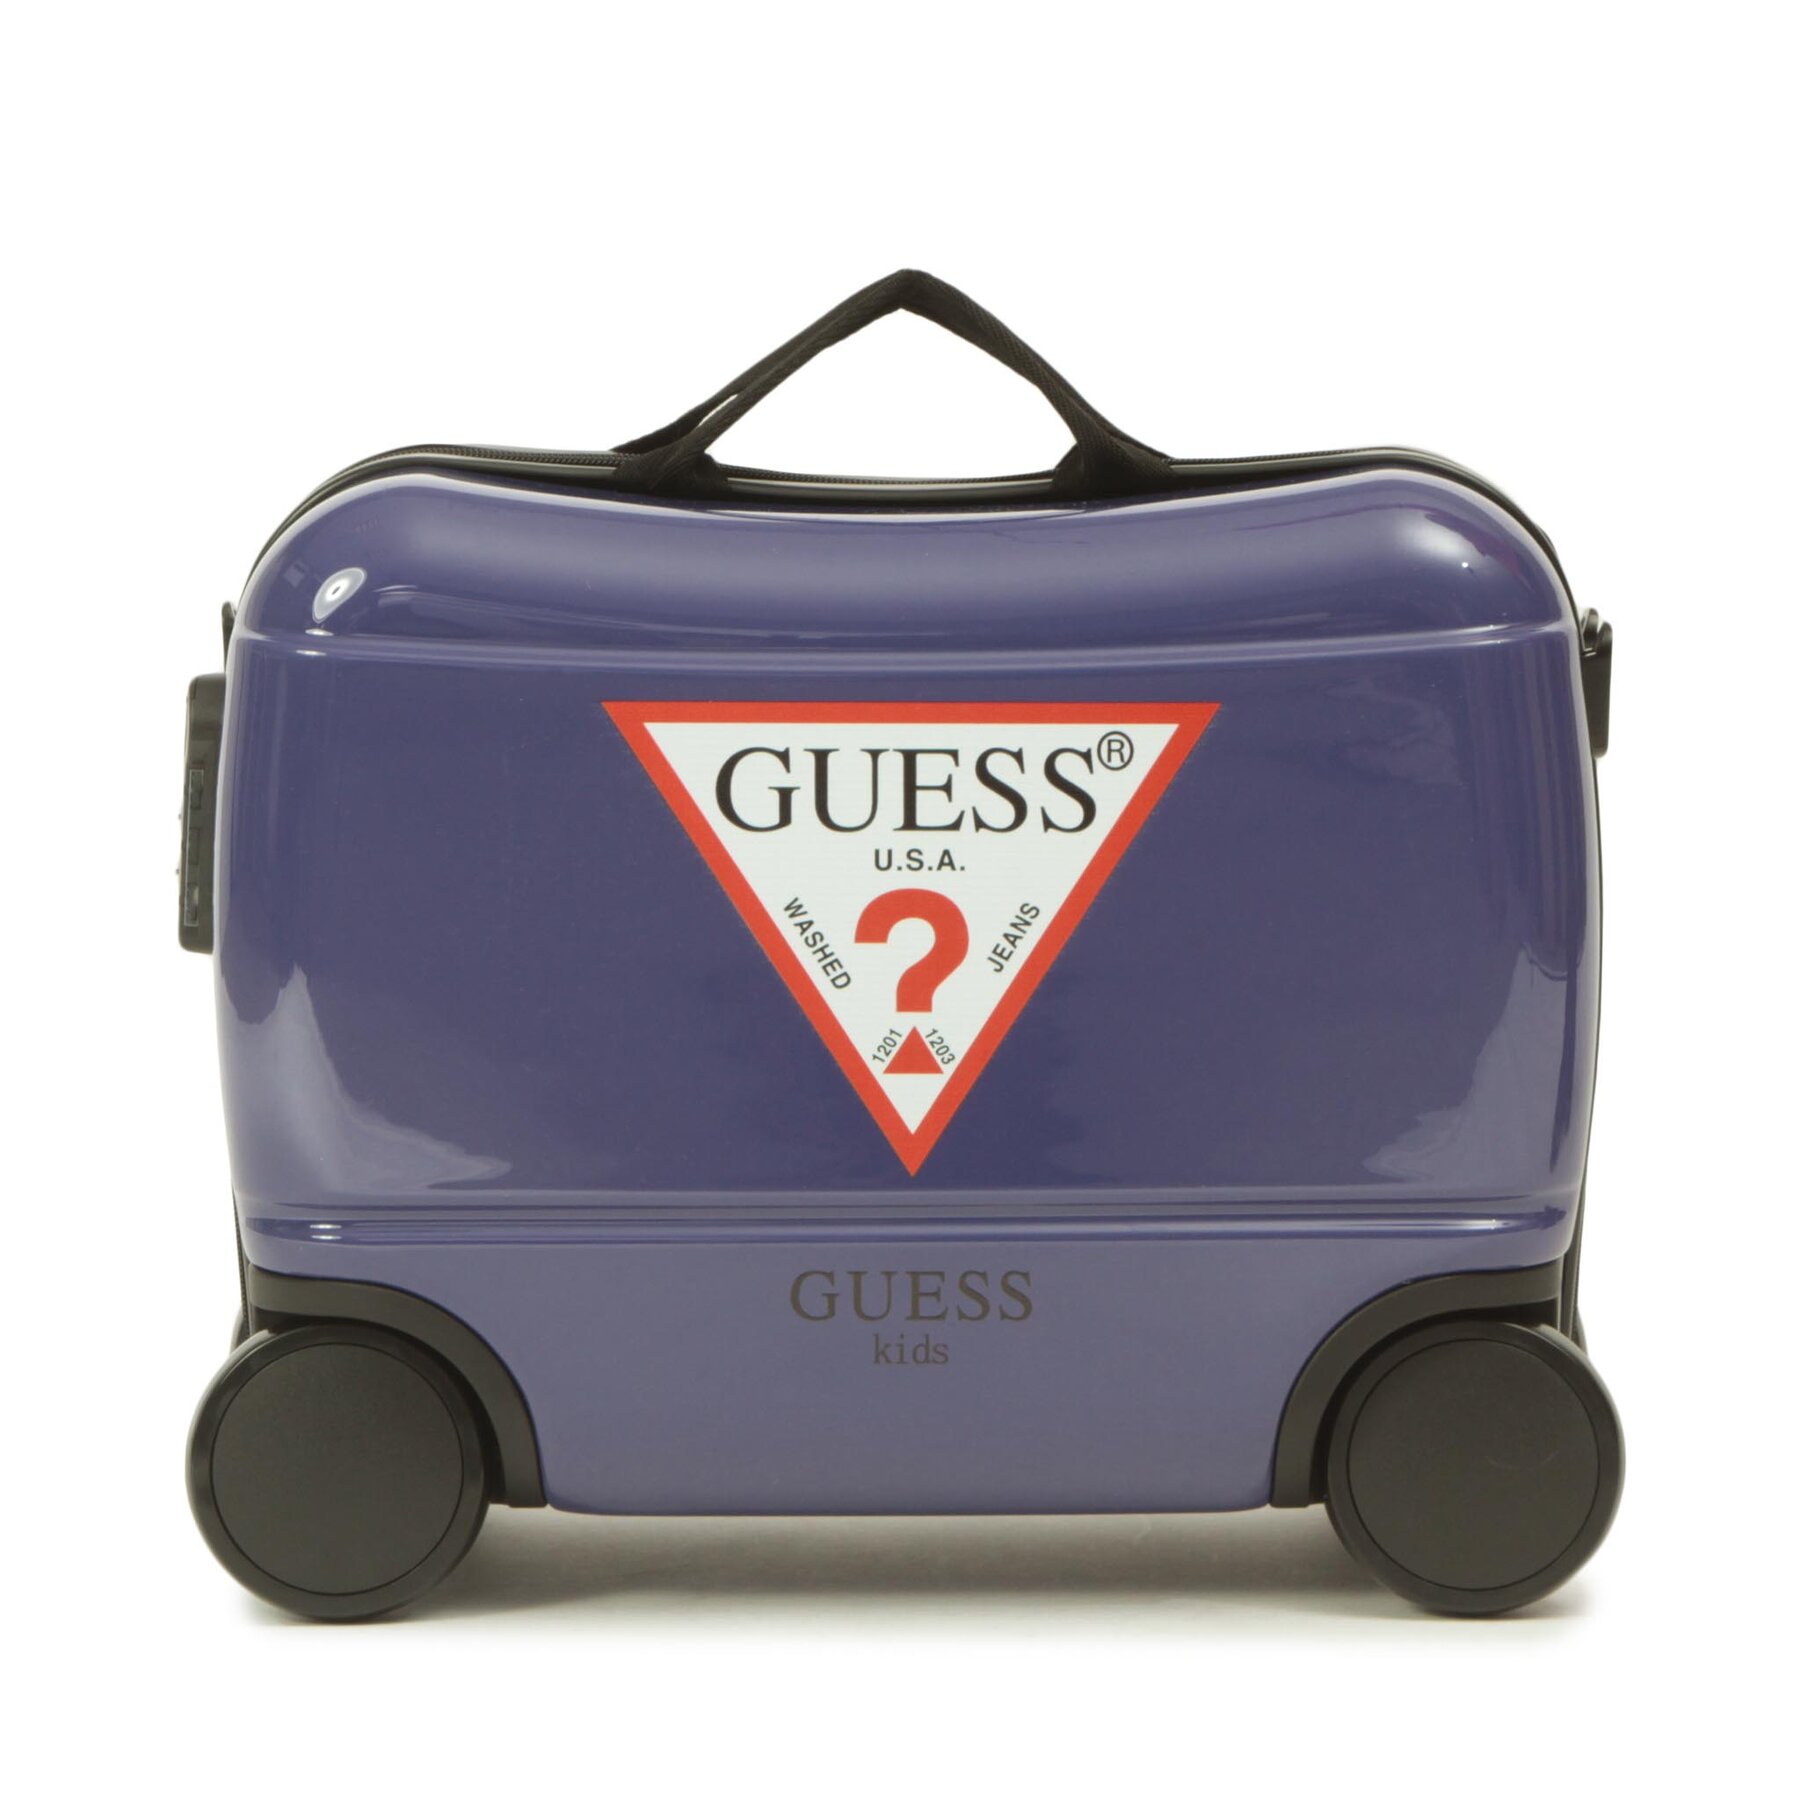 Kinderkoffer Guess H3GZ04 WFGY0 G7KR von Guess